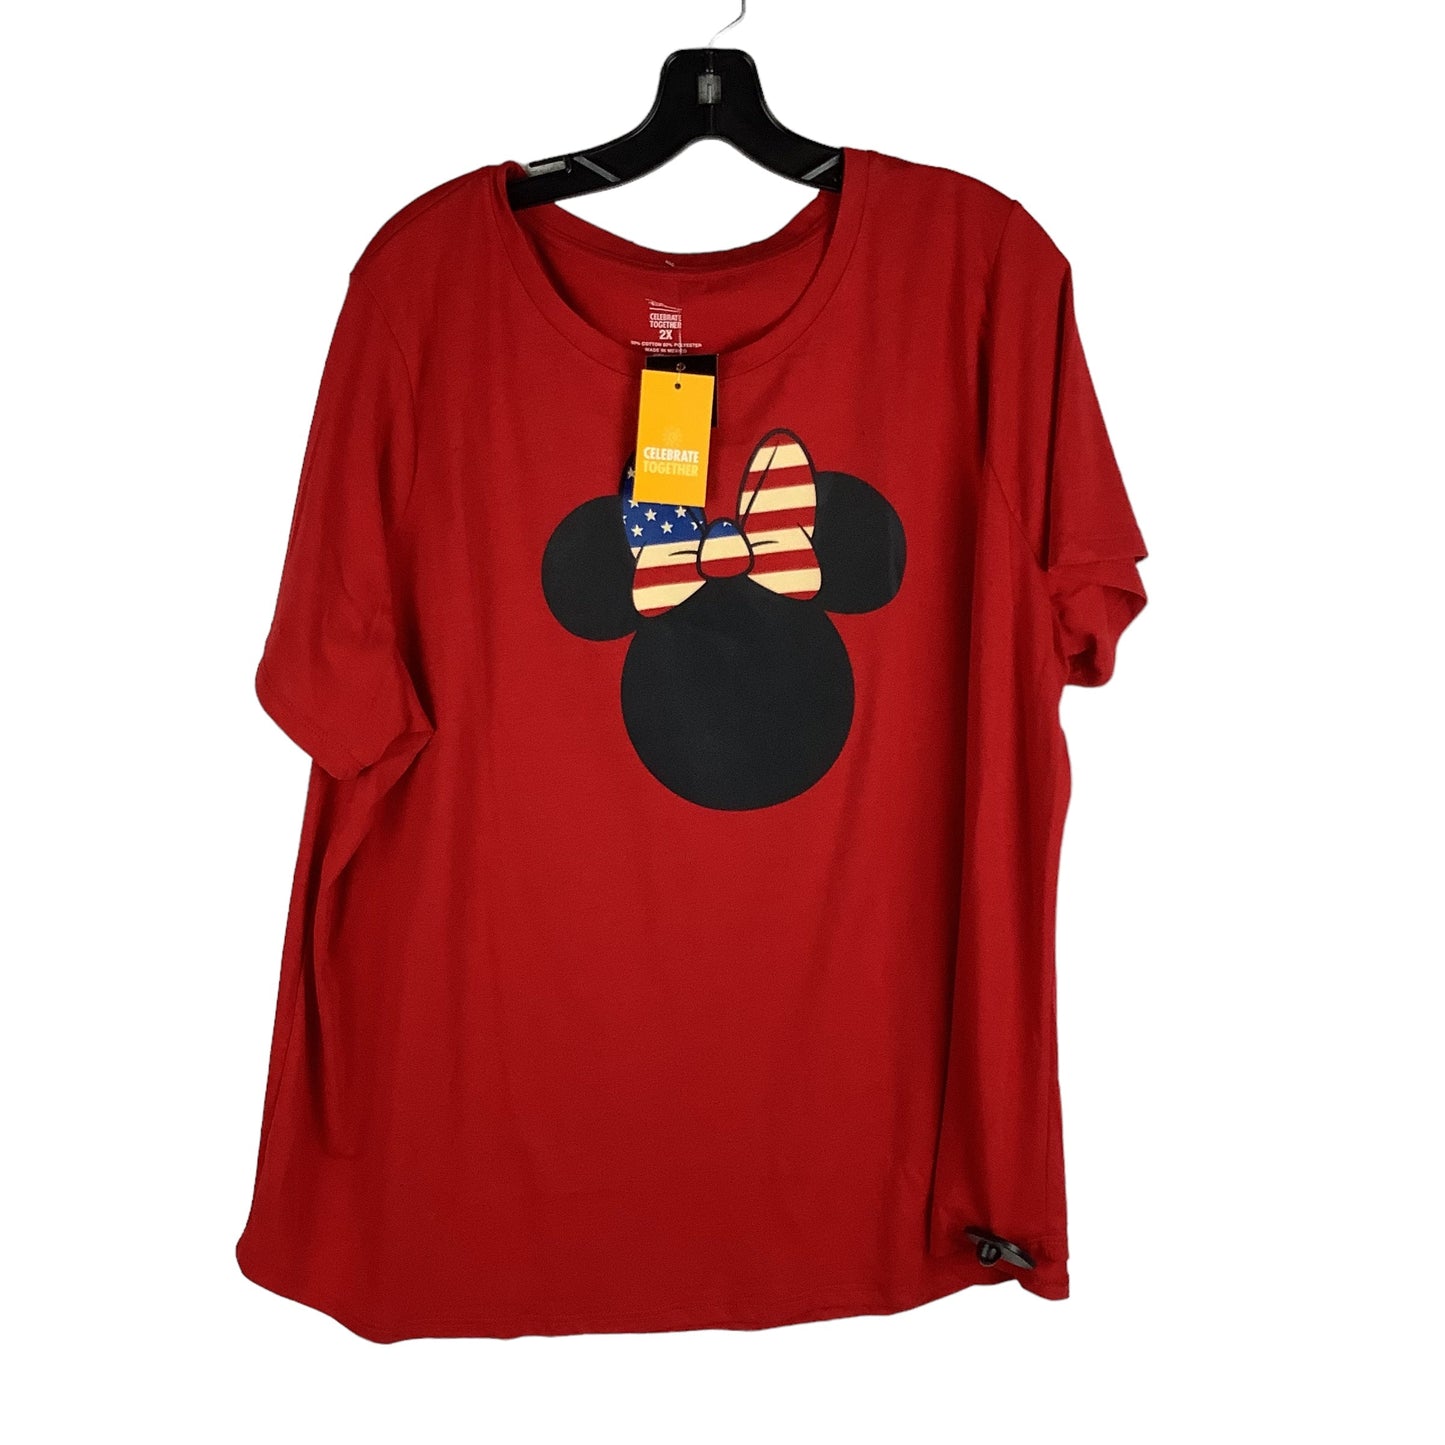 Red Top Short Sleeve Basic Disney Store, Size 2x